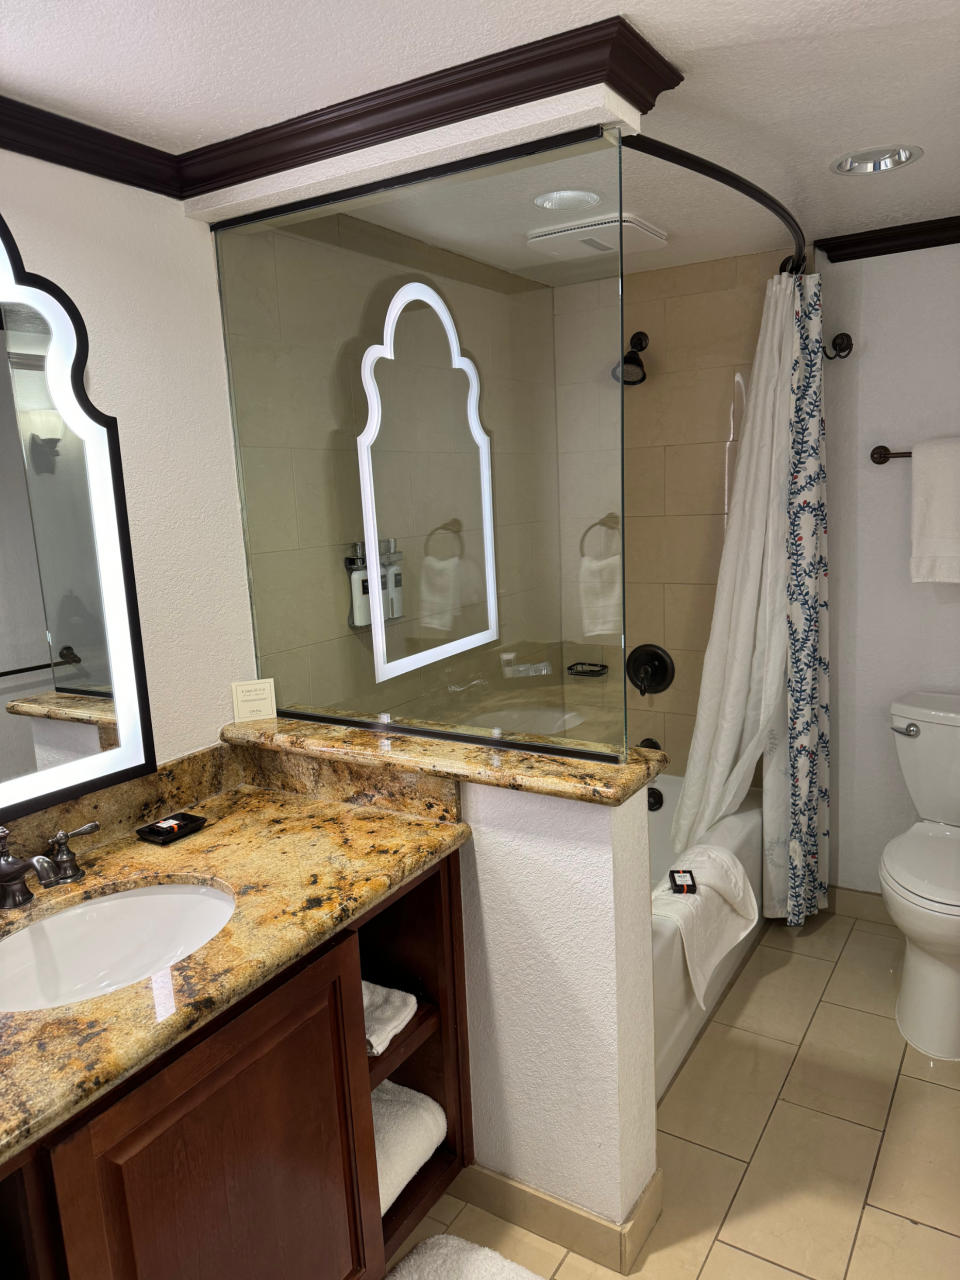 Hotel bathroom with a vanity area, shower stall, and reflective mirror. No people present